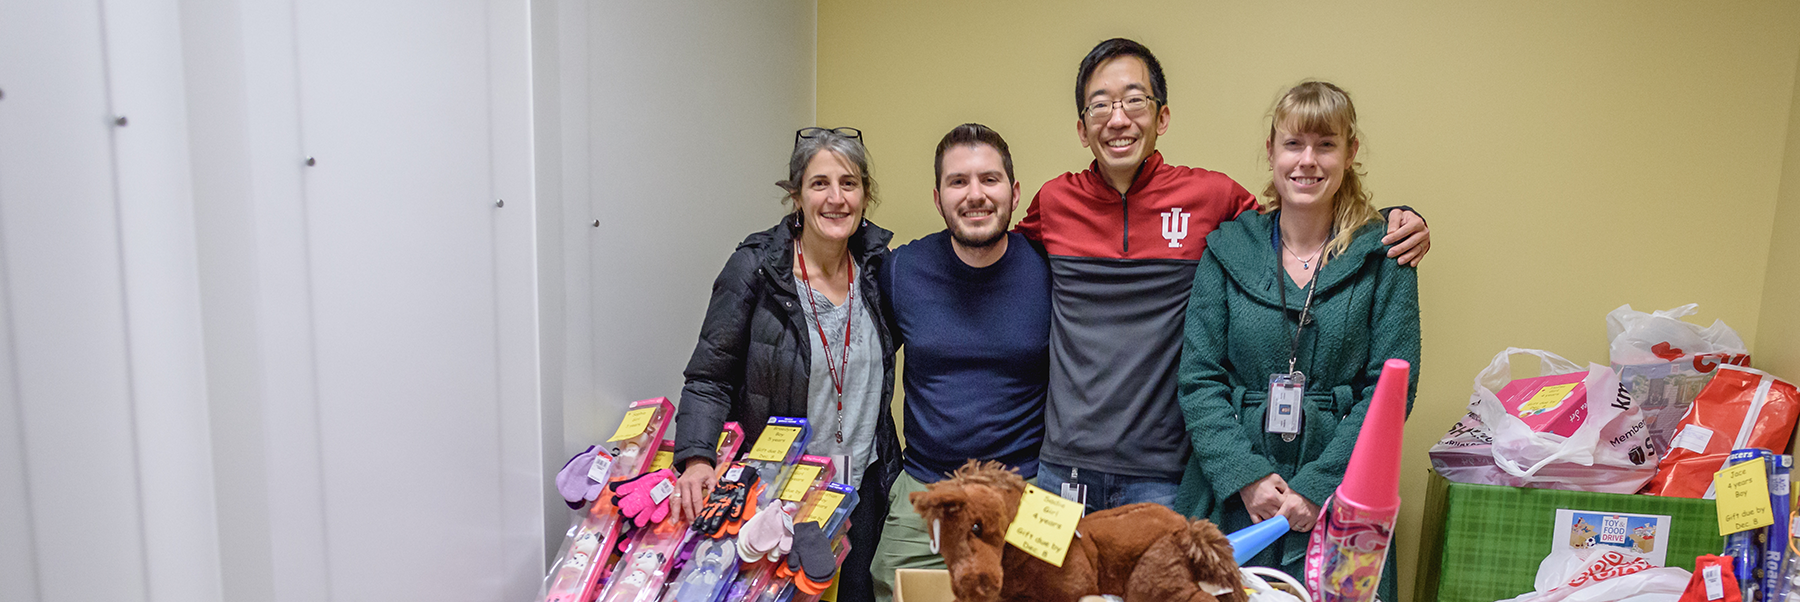 four UITS staff members (two women and two males with arms around each other) stand amidst a bunch of toys they have arranged to deliver to needy children